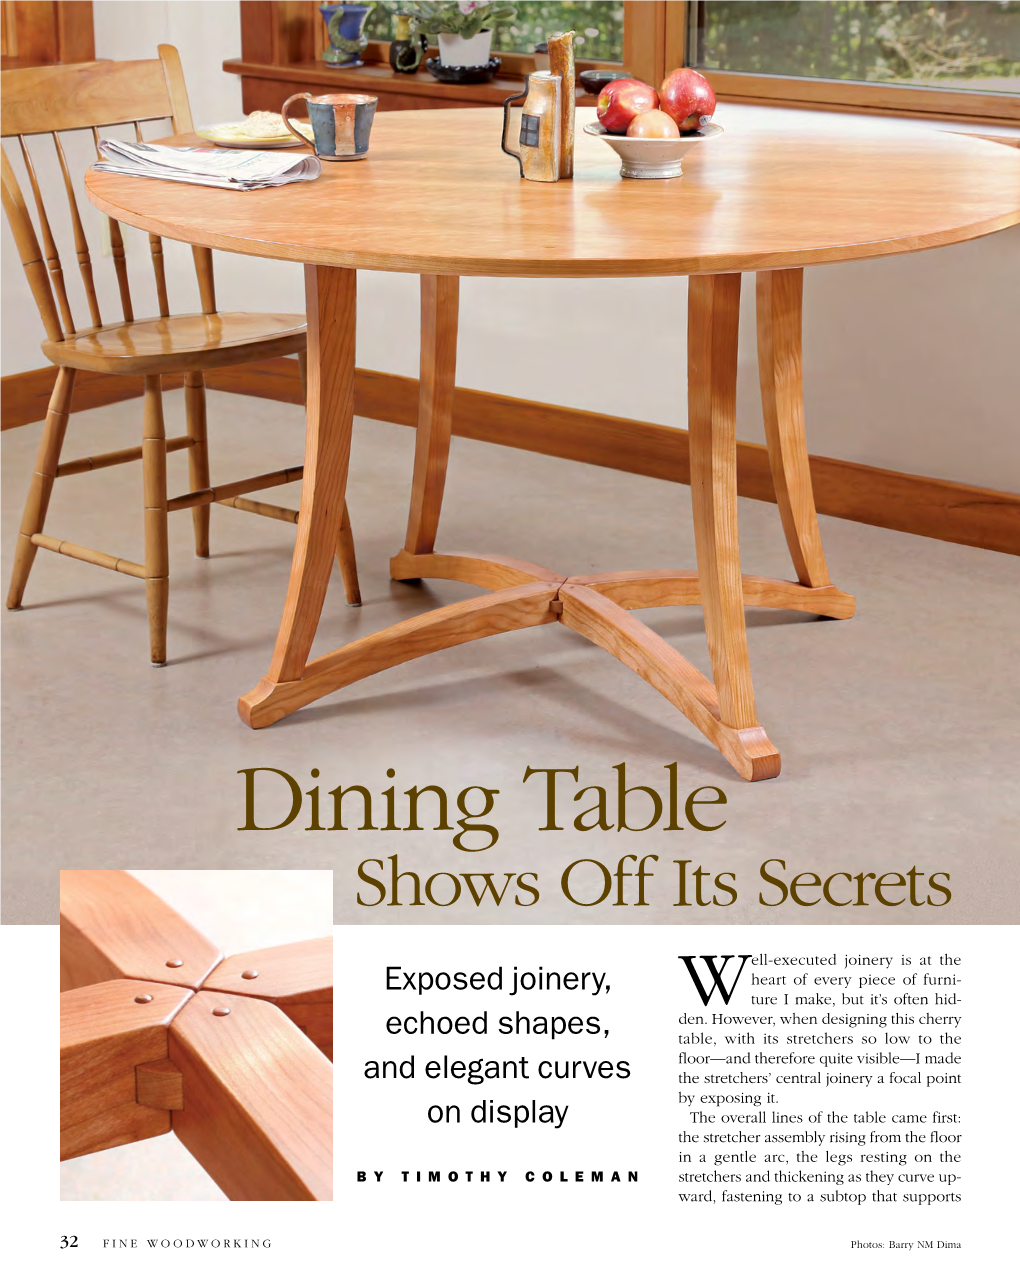 Dining Table Shows Off Its Secrets